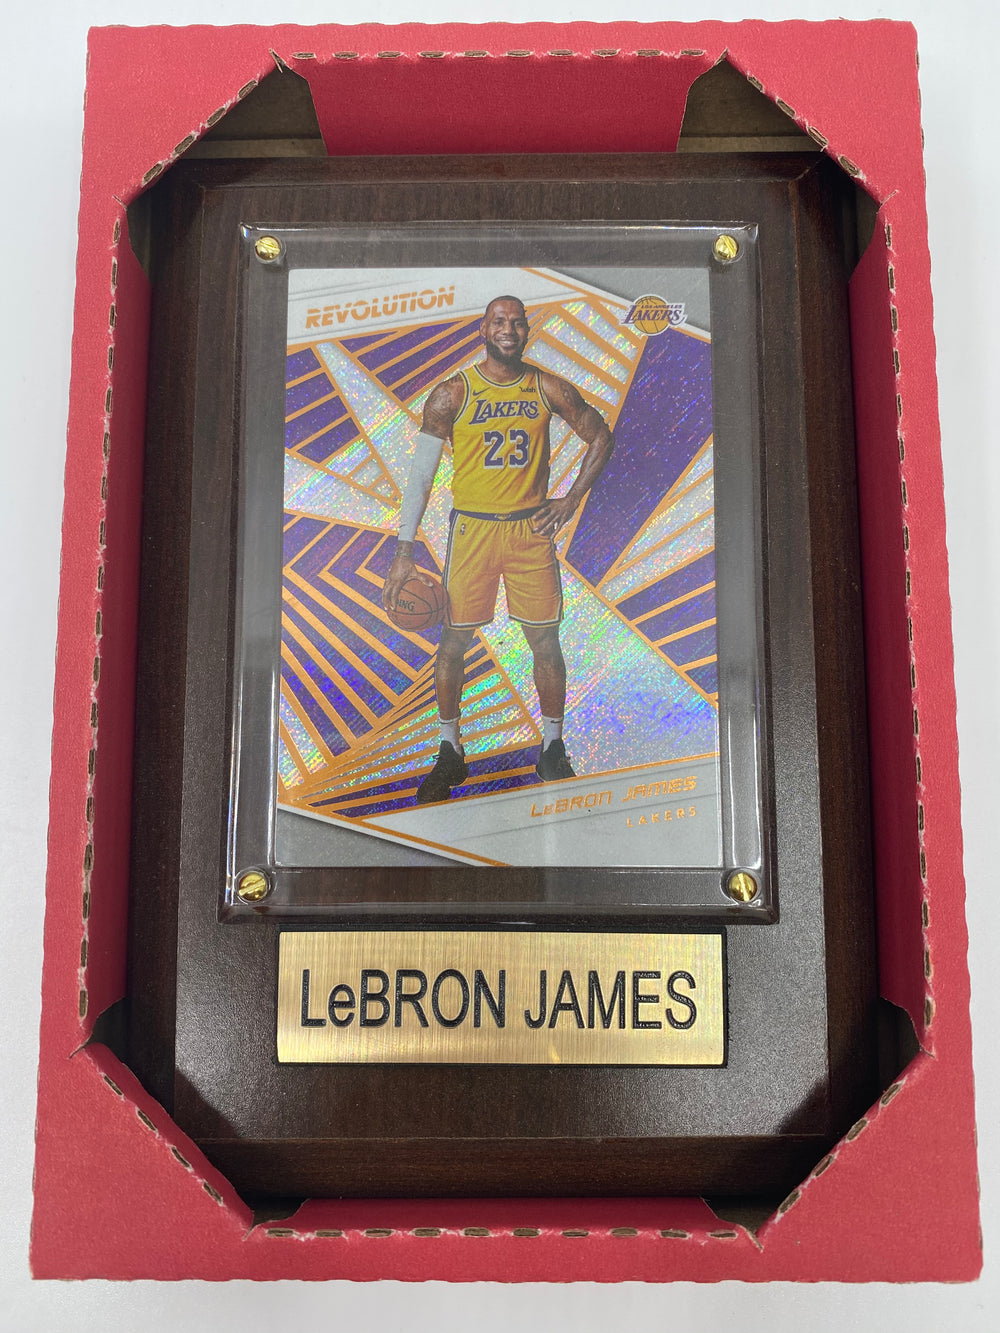 NBA Plaque with card 4x6 Lakers Lebron James